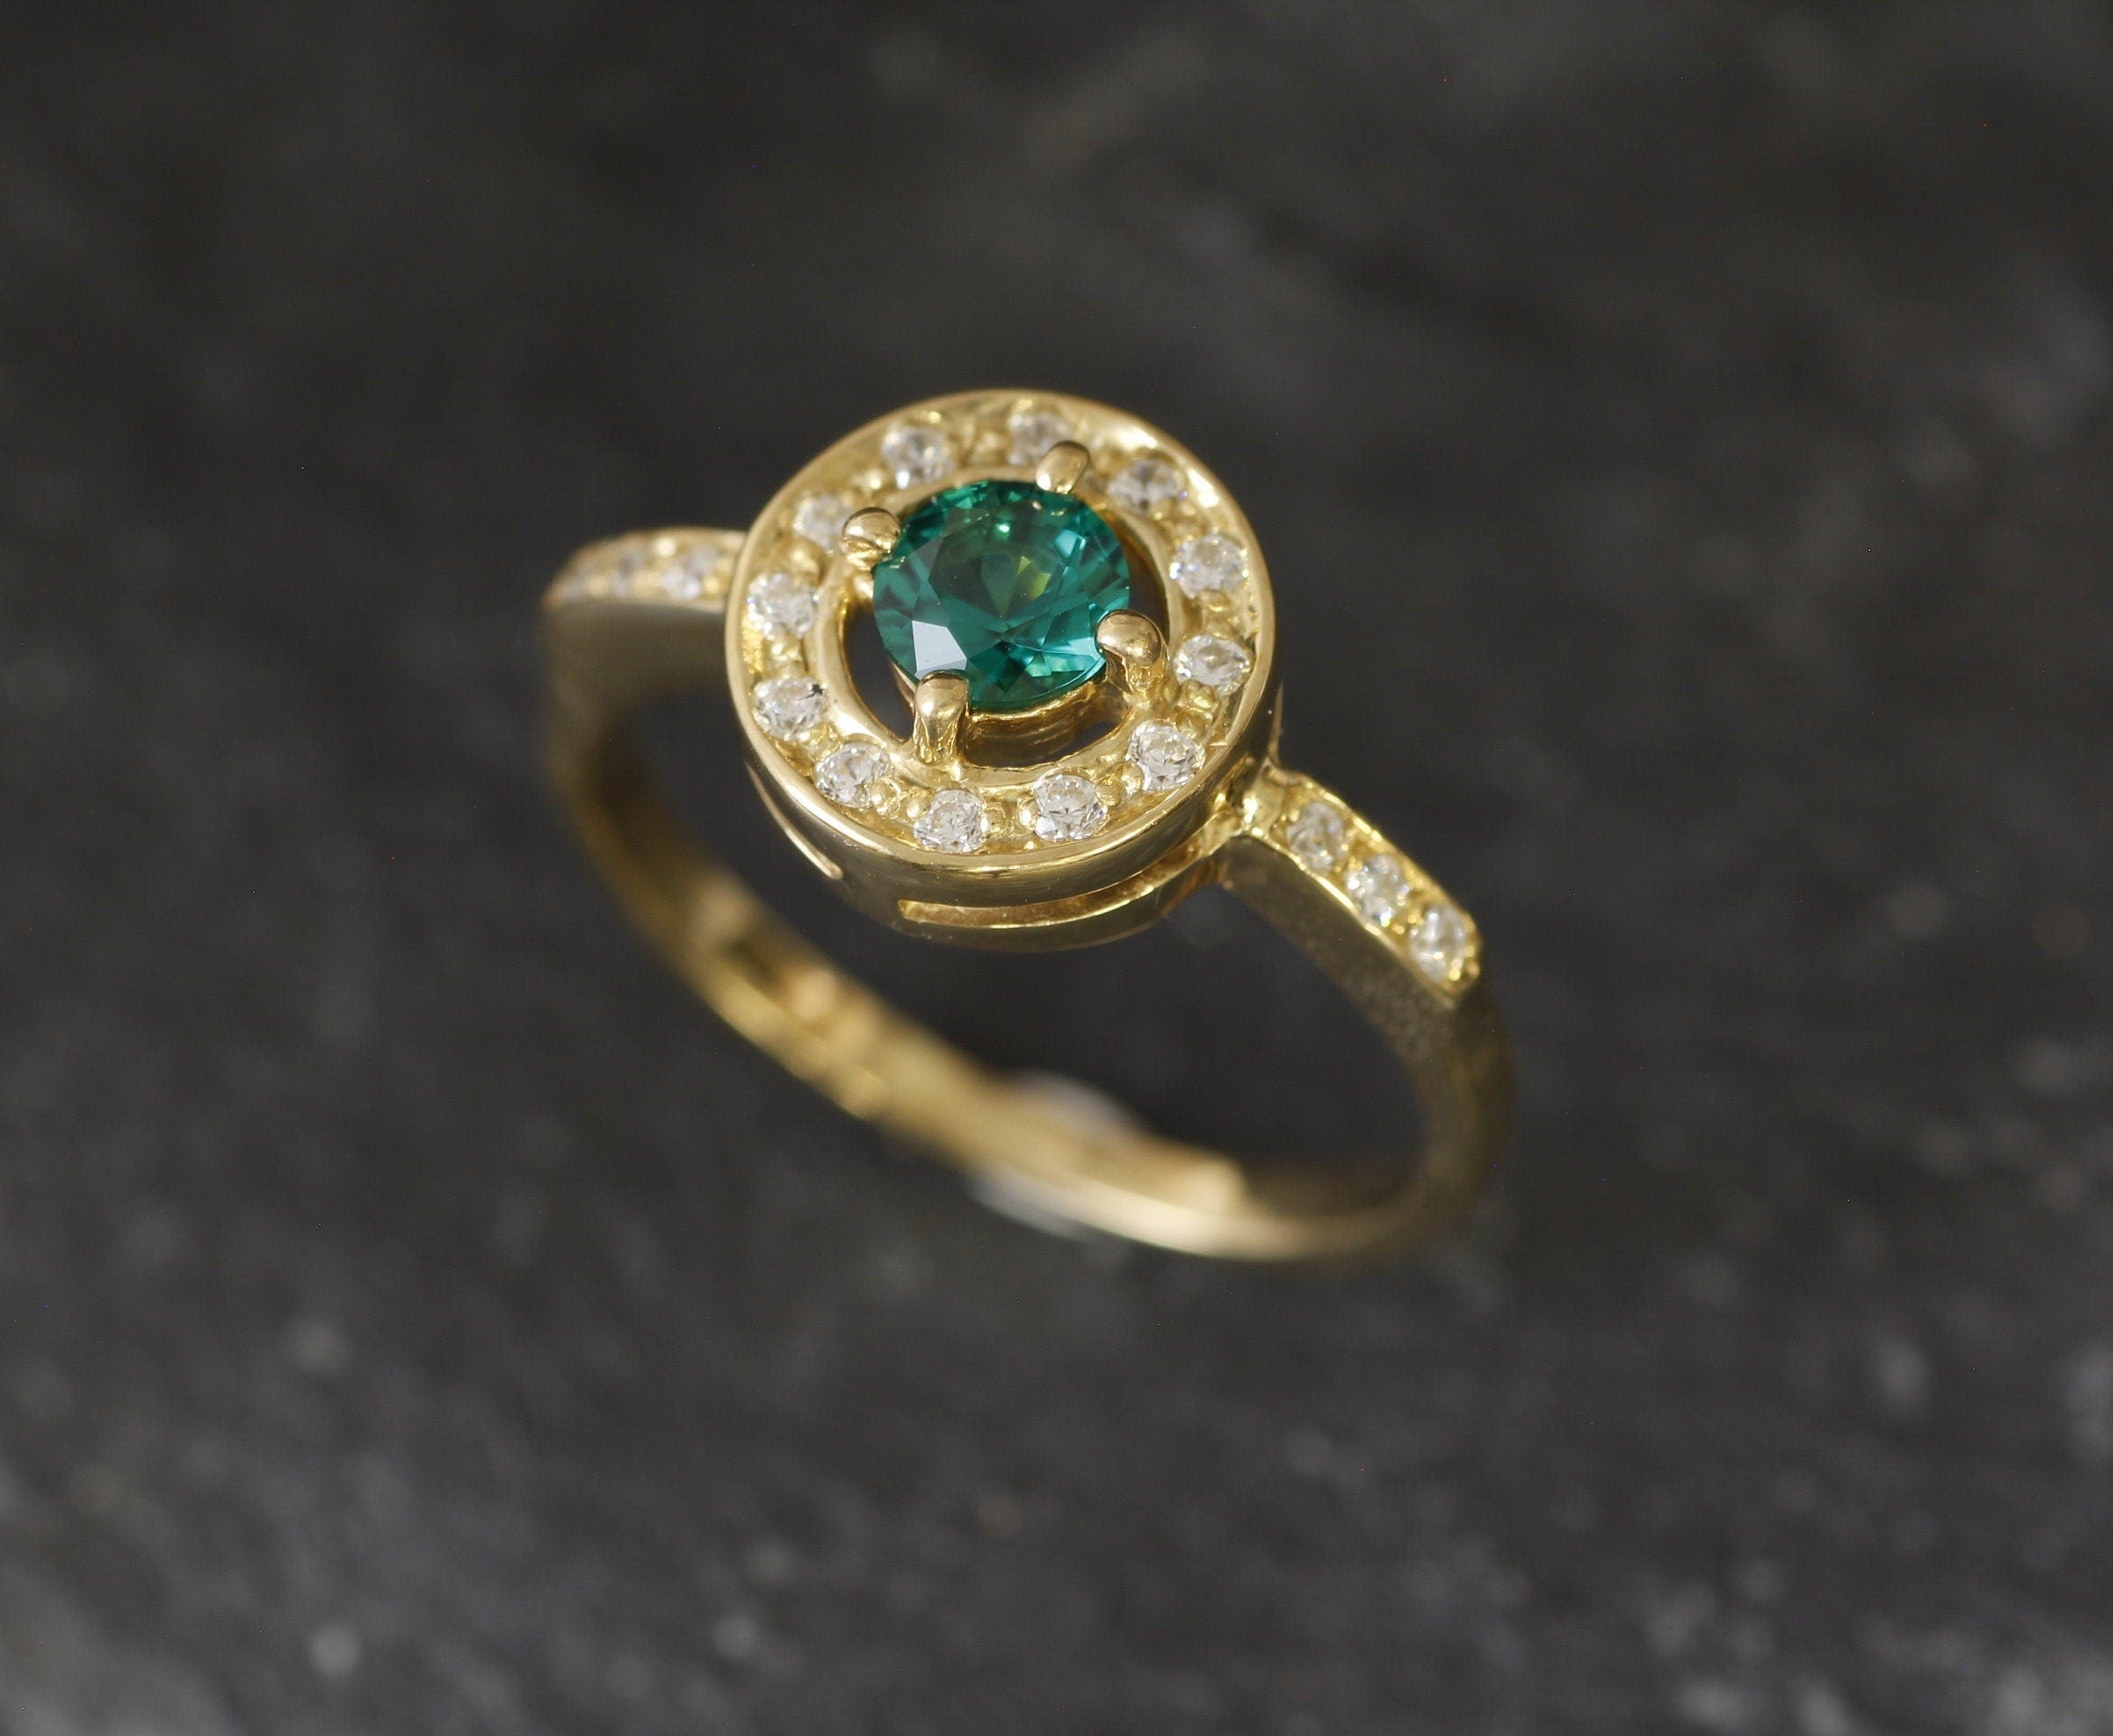 Gold Emerald Ring, Created Emerald, Gold Green Ring, Gold Vintage Ring, Green Diamond Ring, Gold Ring, Solitaire Ring, Silver Ring, Emerald